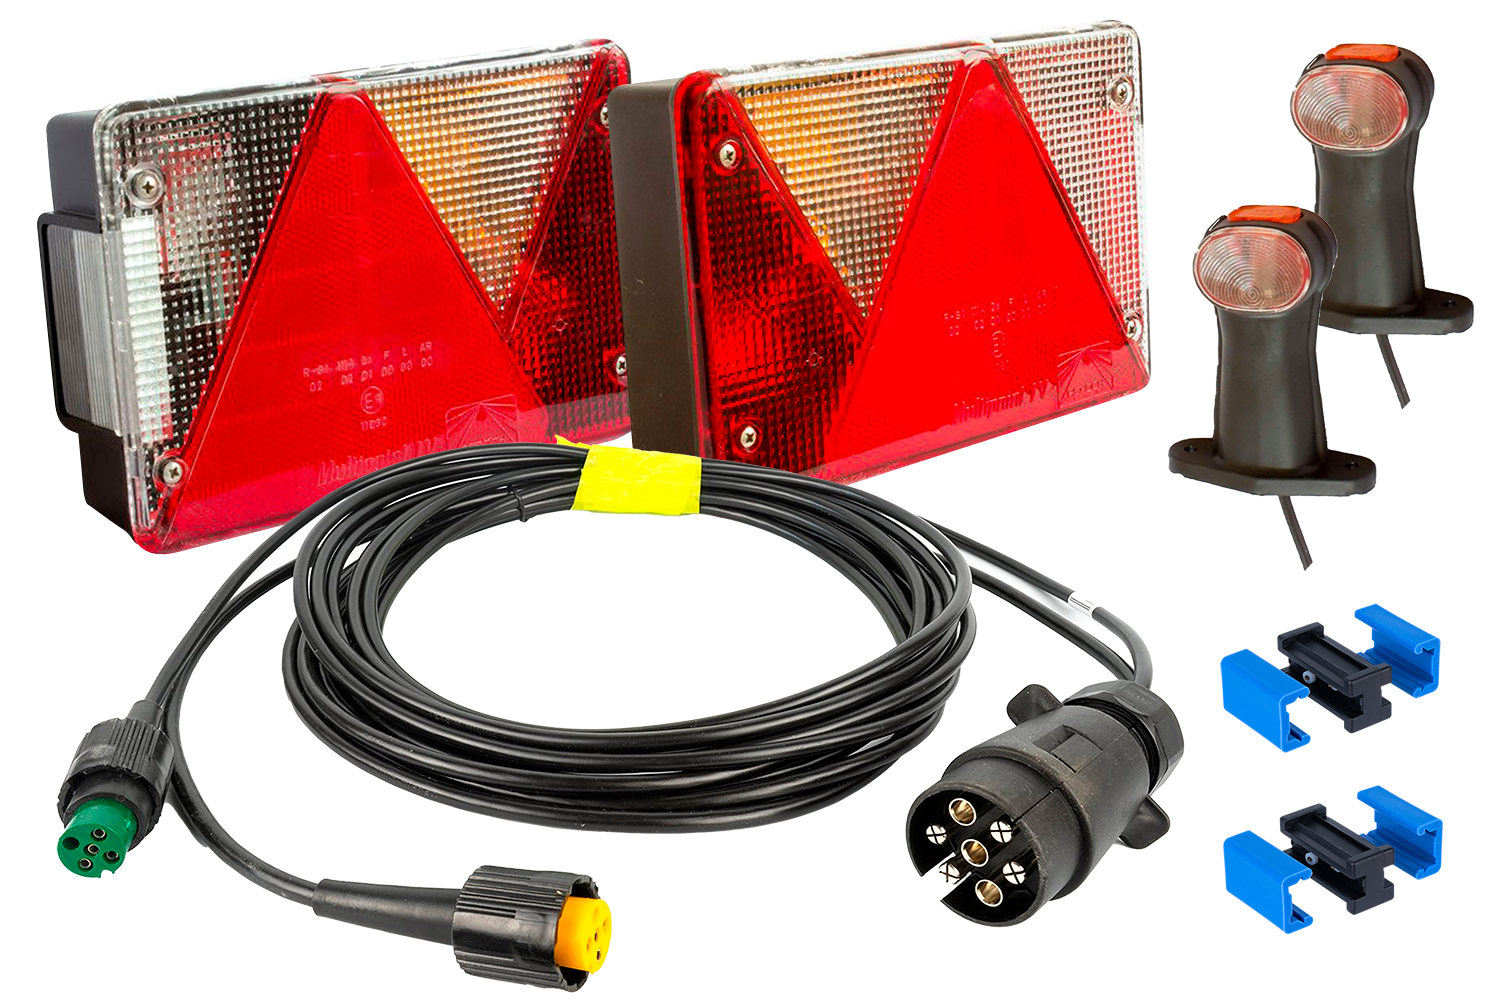 Kit: Aspöck Multipoint II rear lights, Superpoint II side marker lights  with 8 m 13-pin wiring harness and 2x quick-splice connectors